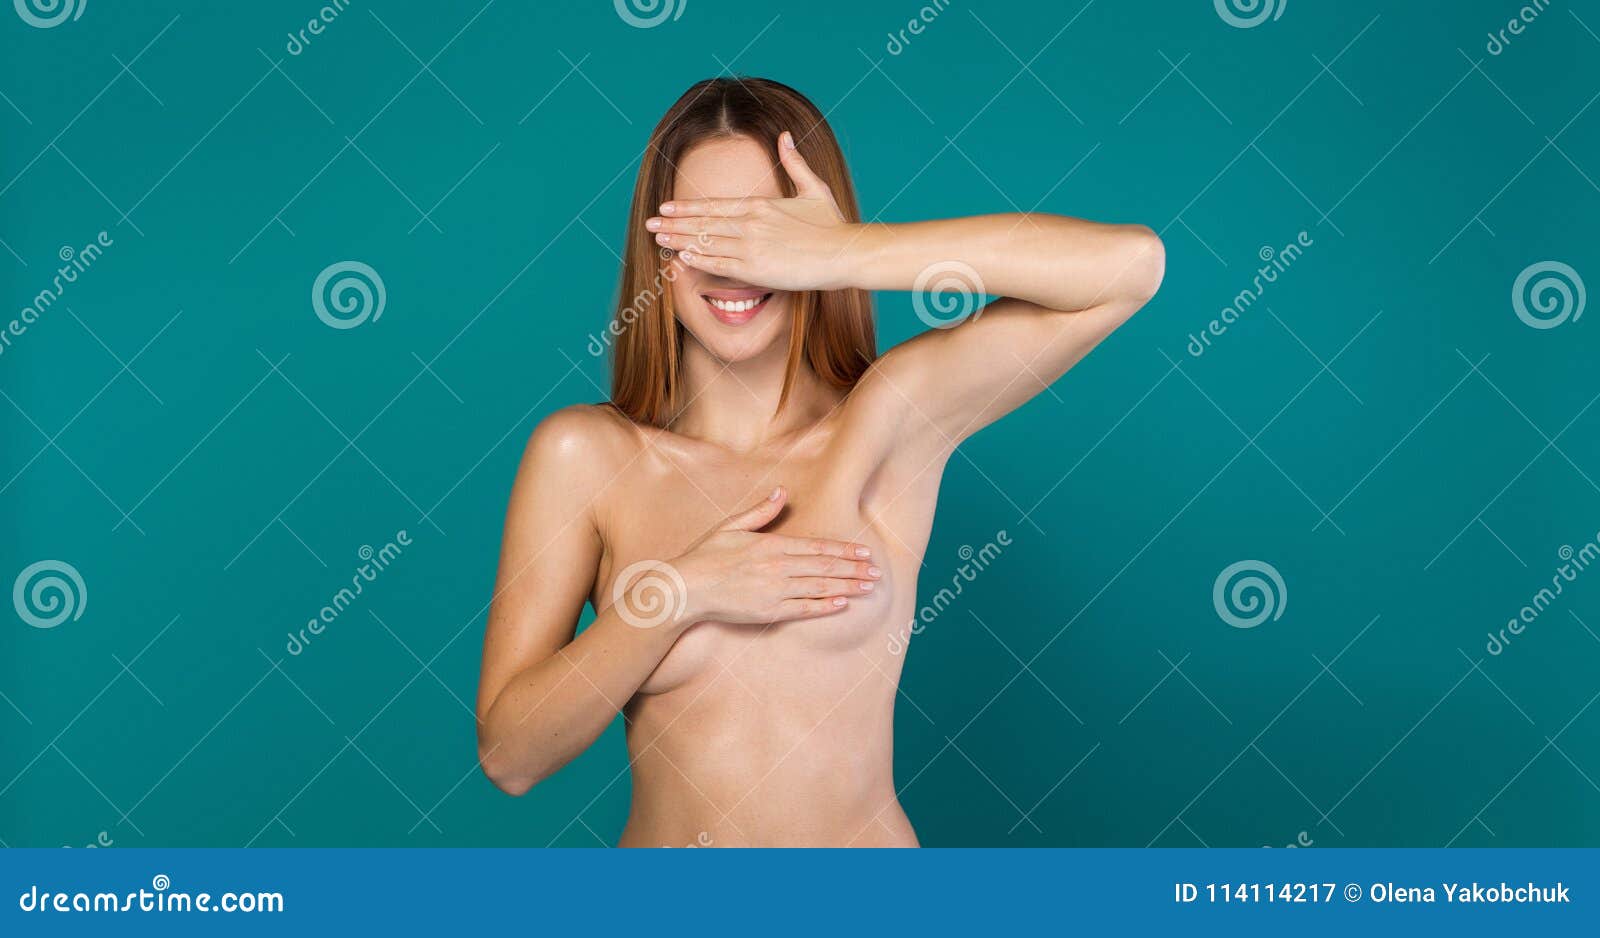 Naked And Shy Girls